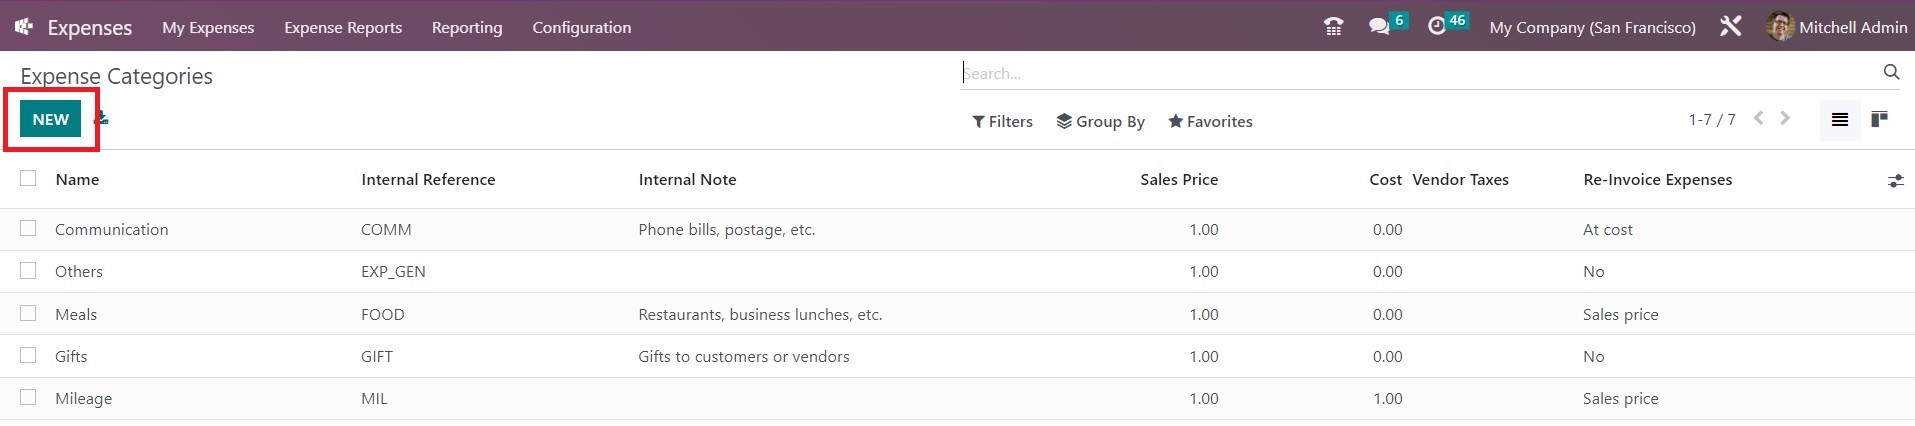 Reinvoicing Expenses To Customers in Odoo - 3 - Midis